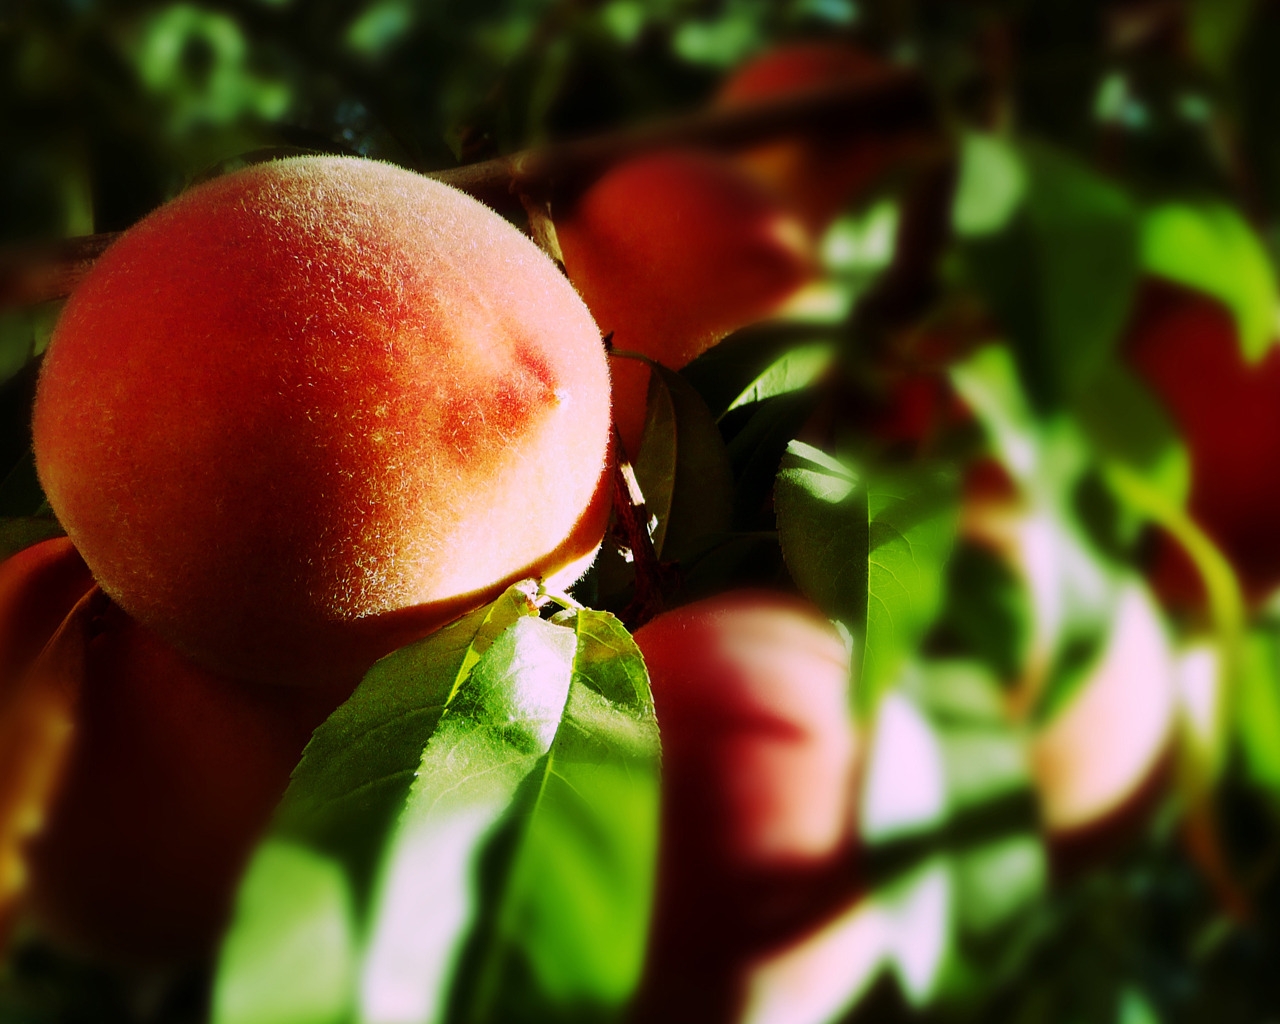 Blurry Peaches for 1280 x 1024 resolution